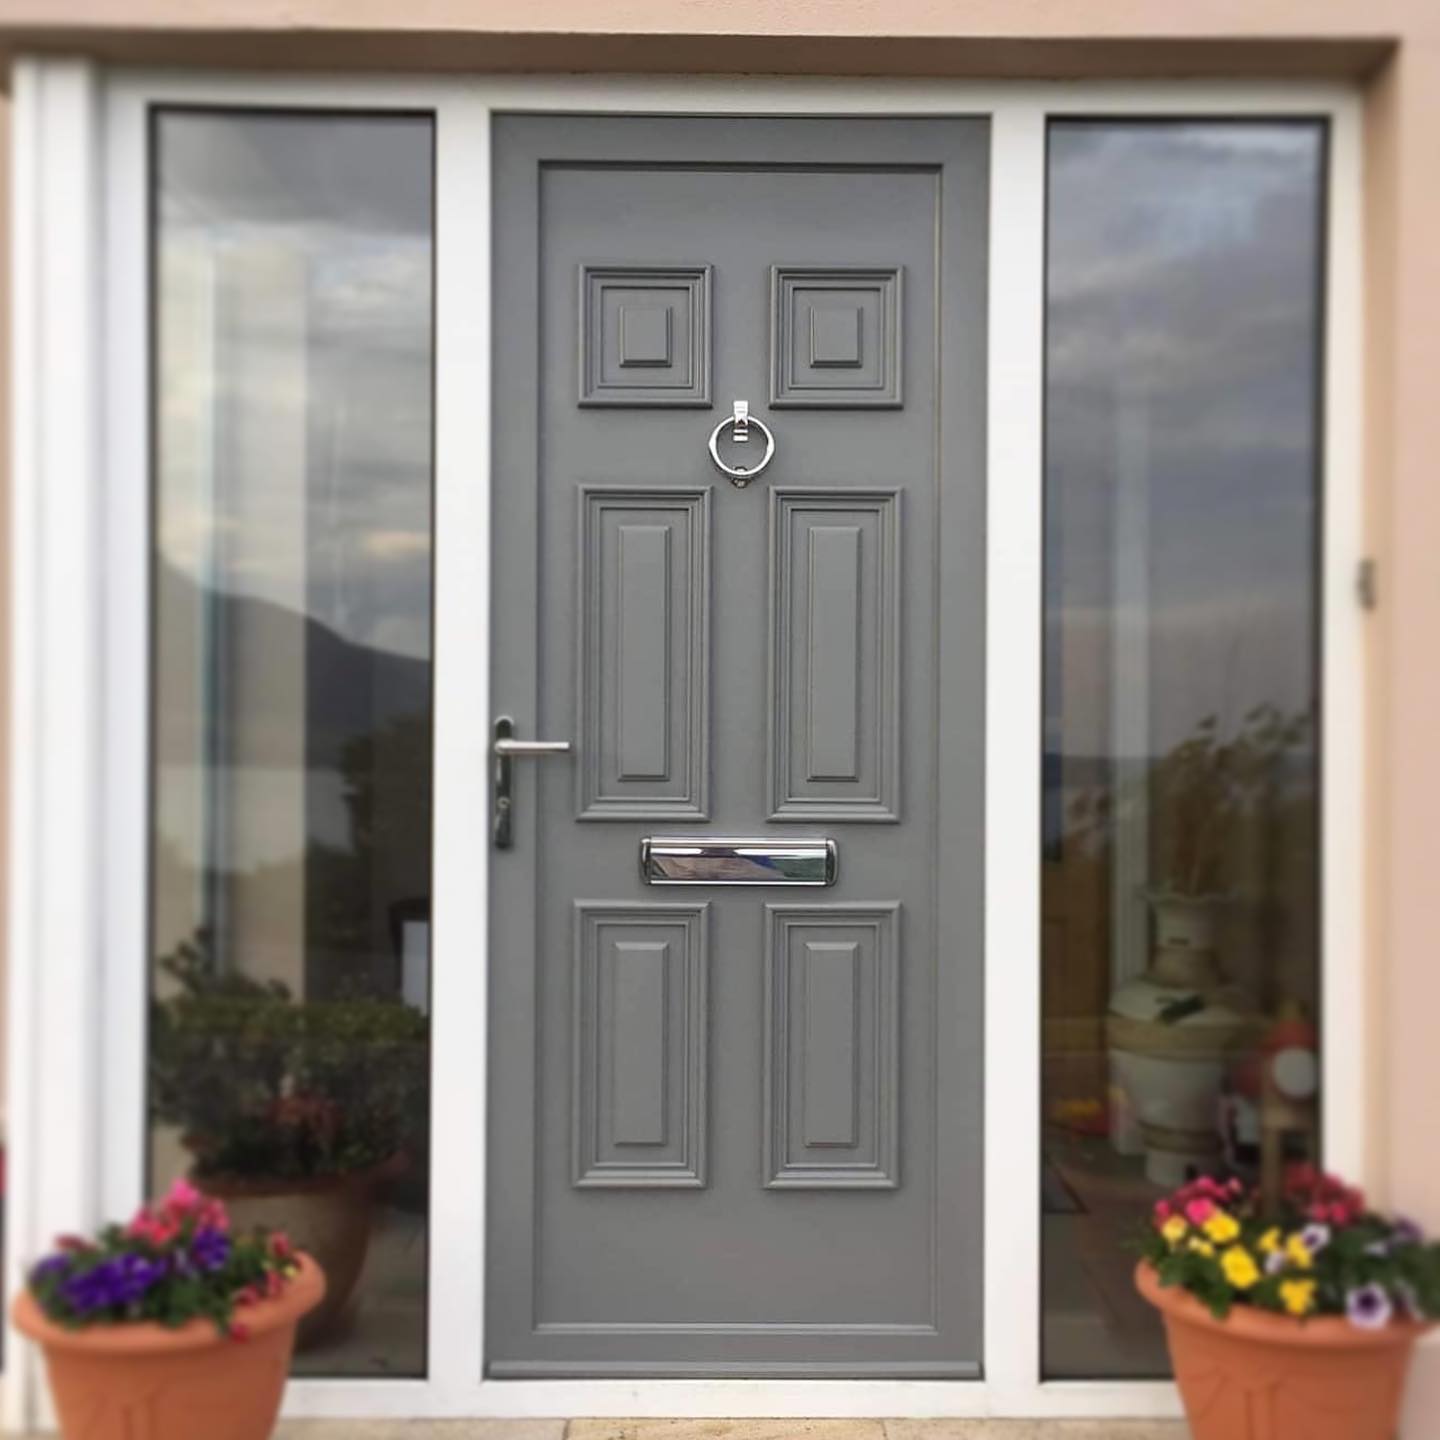 Here’s a front door we sprayed from white to RAL 7012 Basalt Grey....